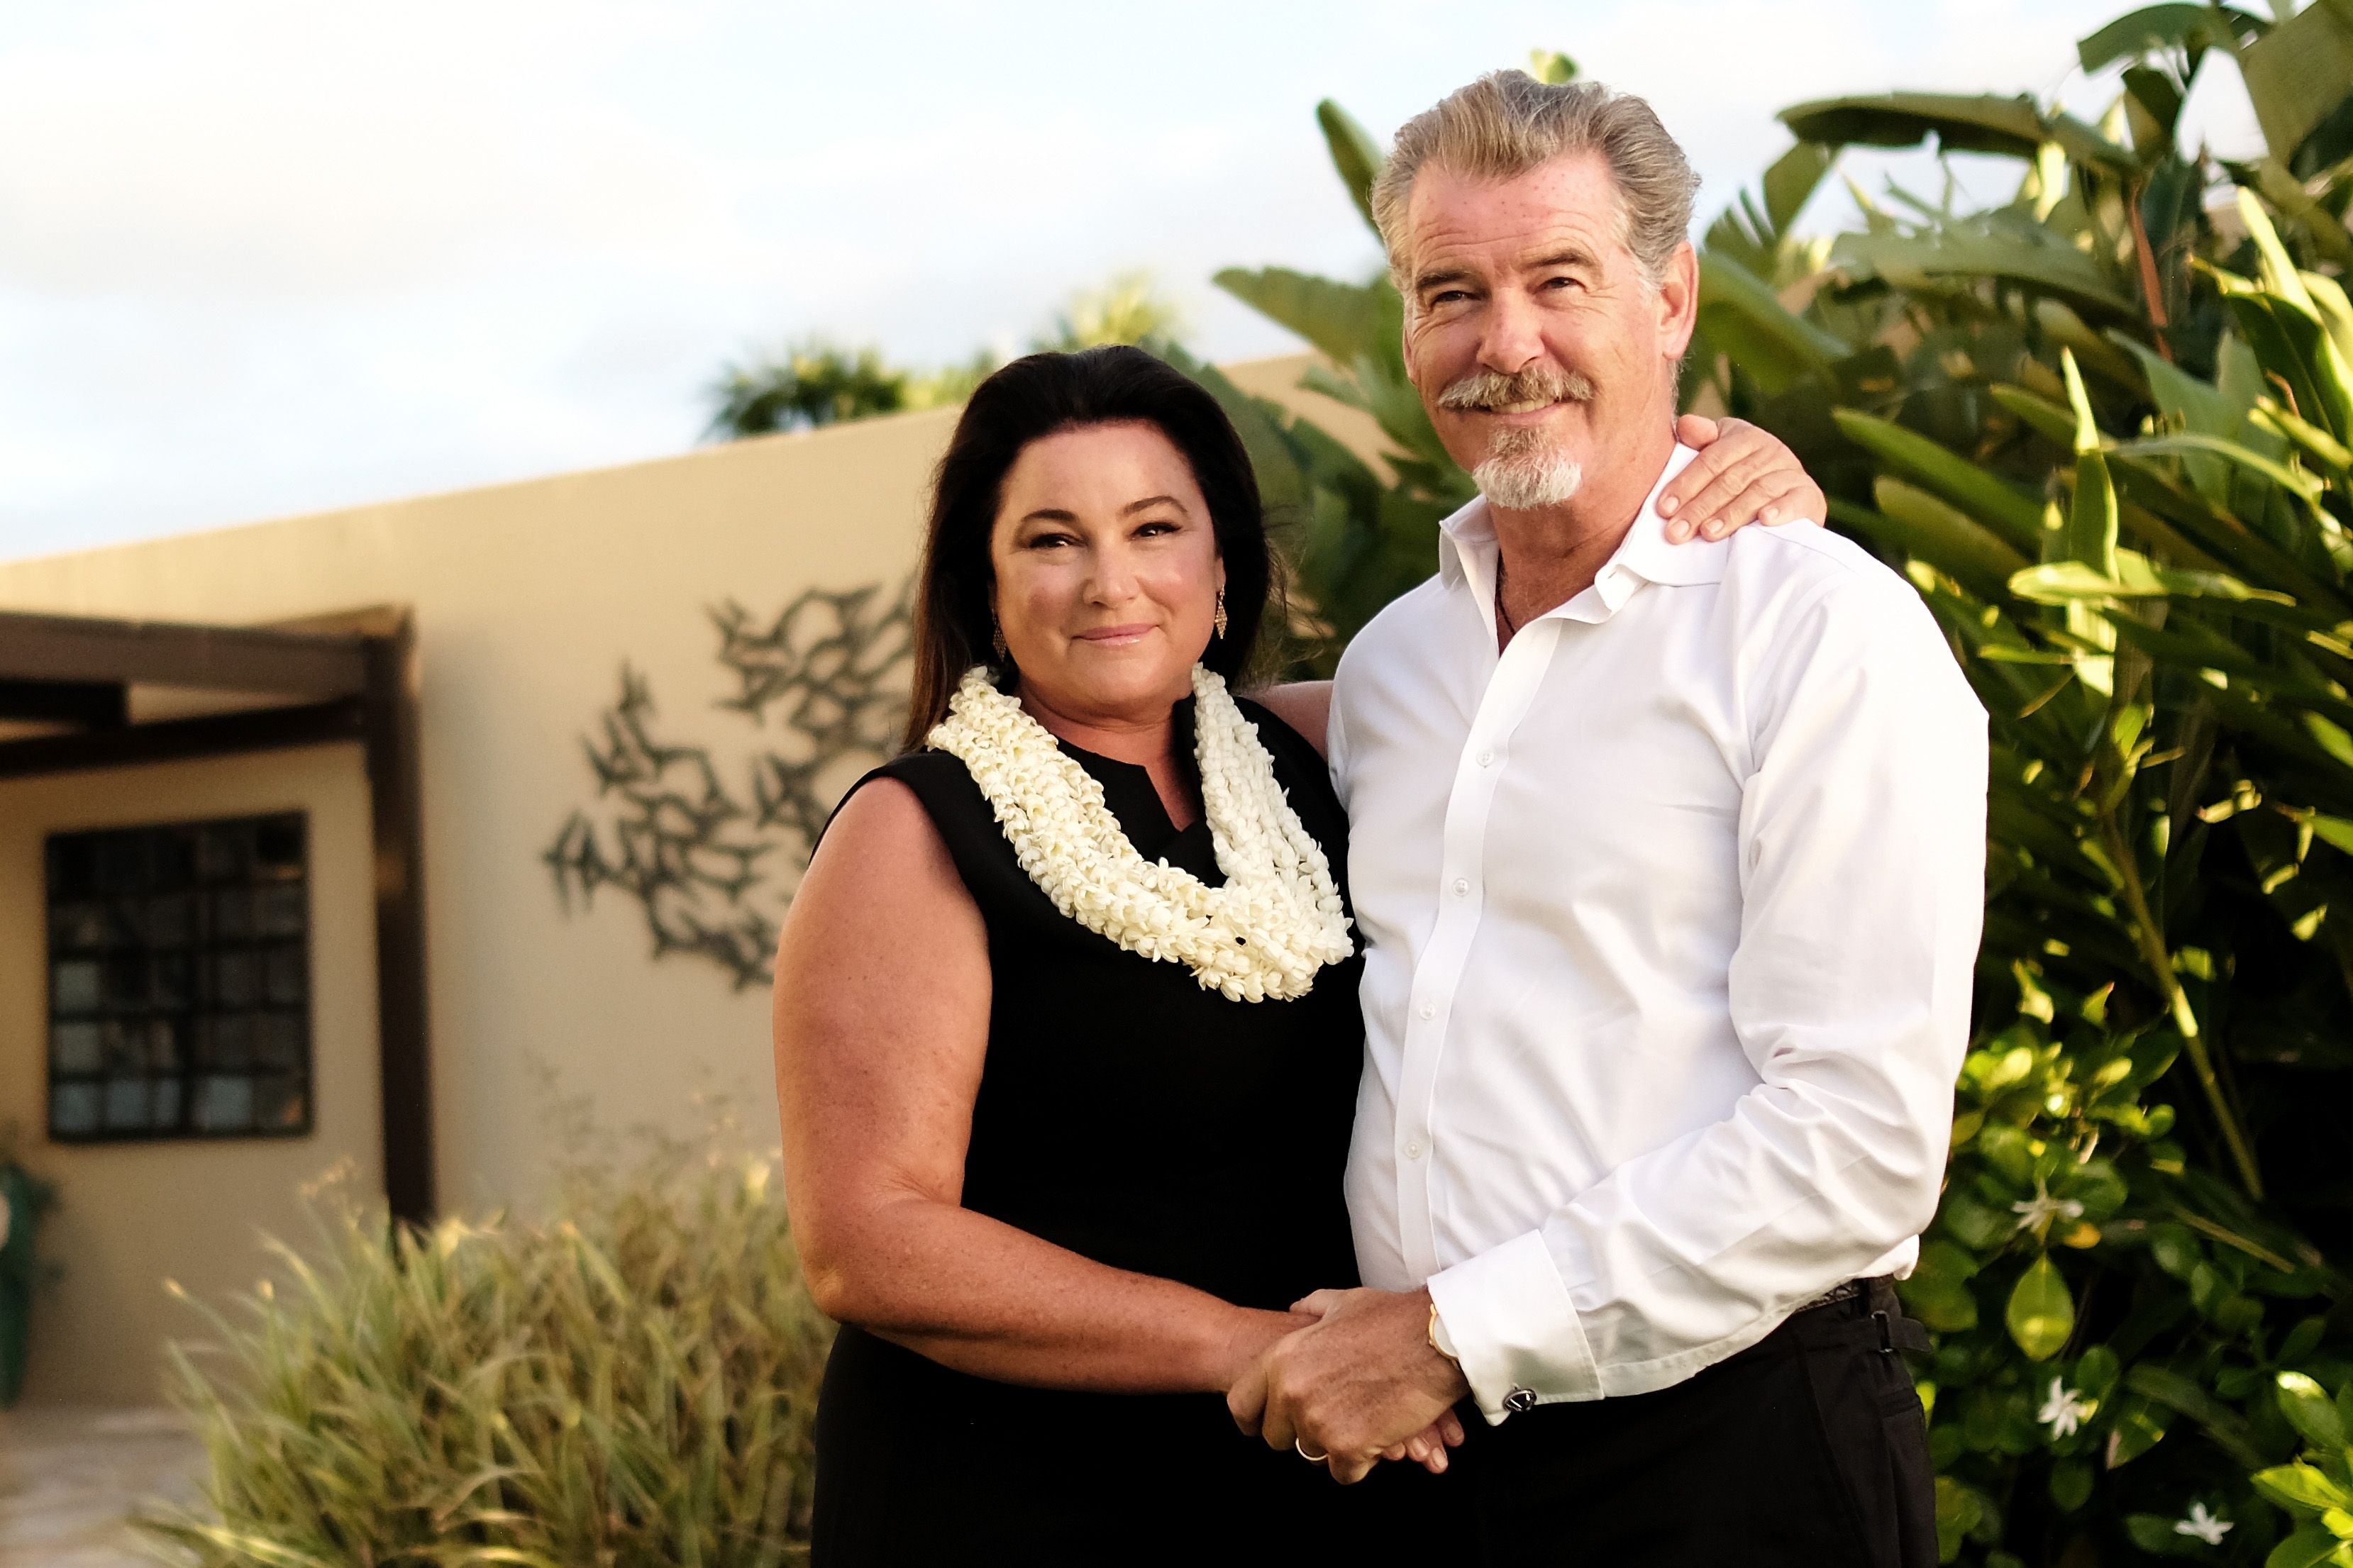 Keely Shaye Smith and Pierce Brosnan recipients of the Pathfinder Award, pose for a portrait during day three of the 2017 Maui Film Festival At Wailea on June 23, 2017 | Photo: Getty Images